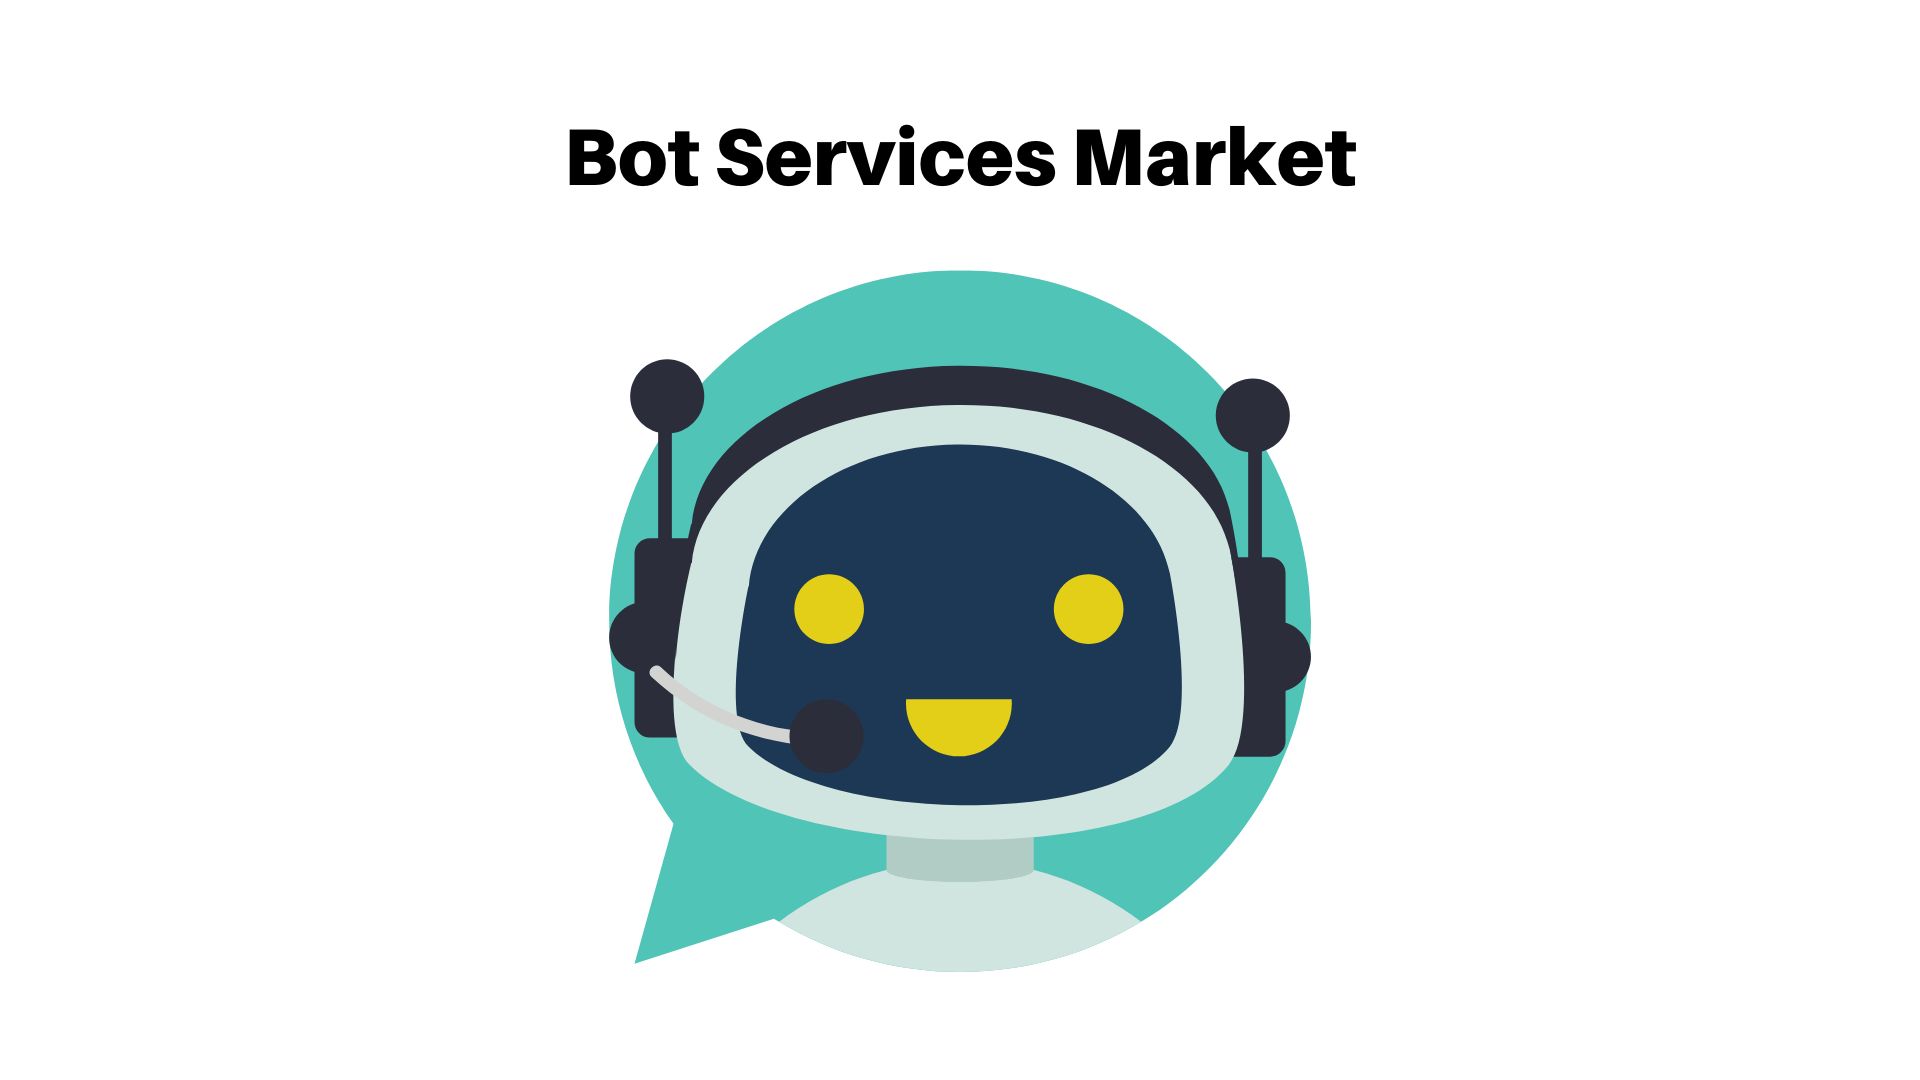 Global Bot Services Market projected to reach USD 40.94 Bn | CAGR 33.6%